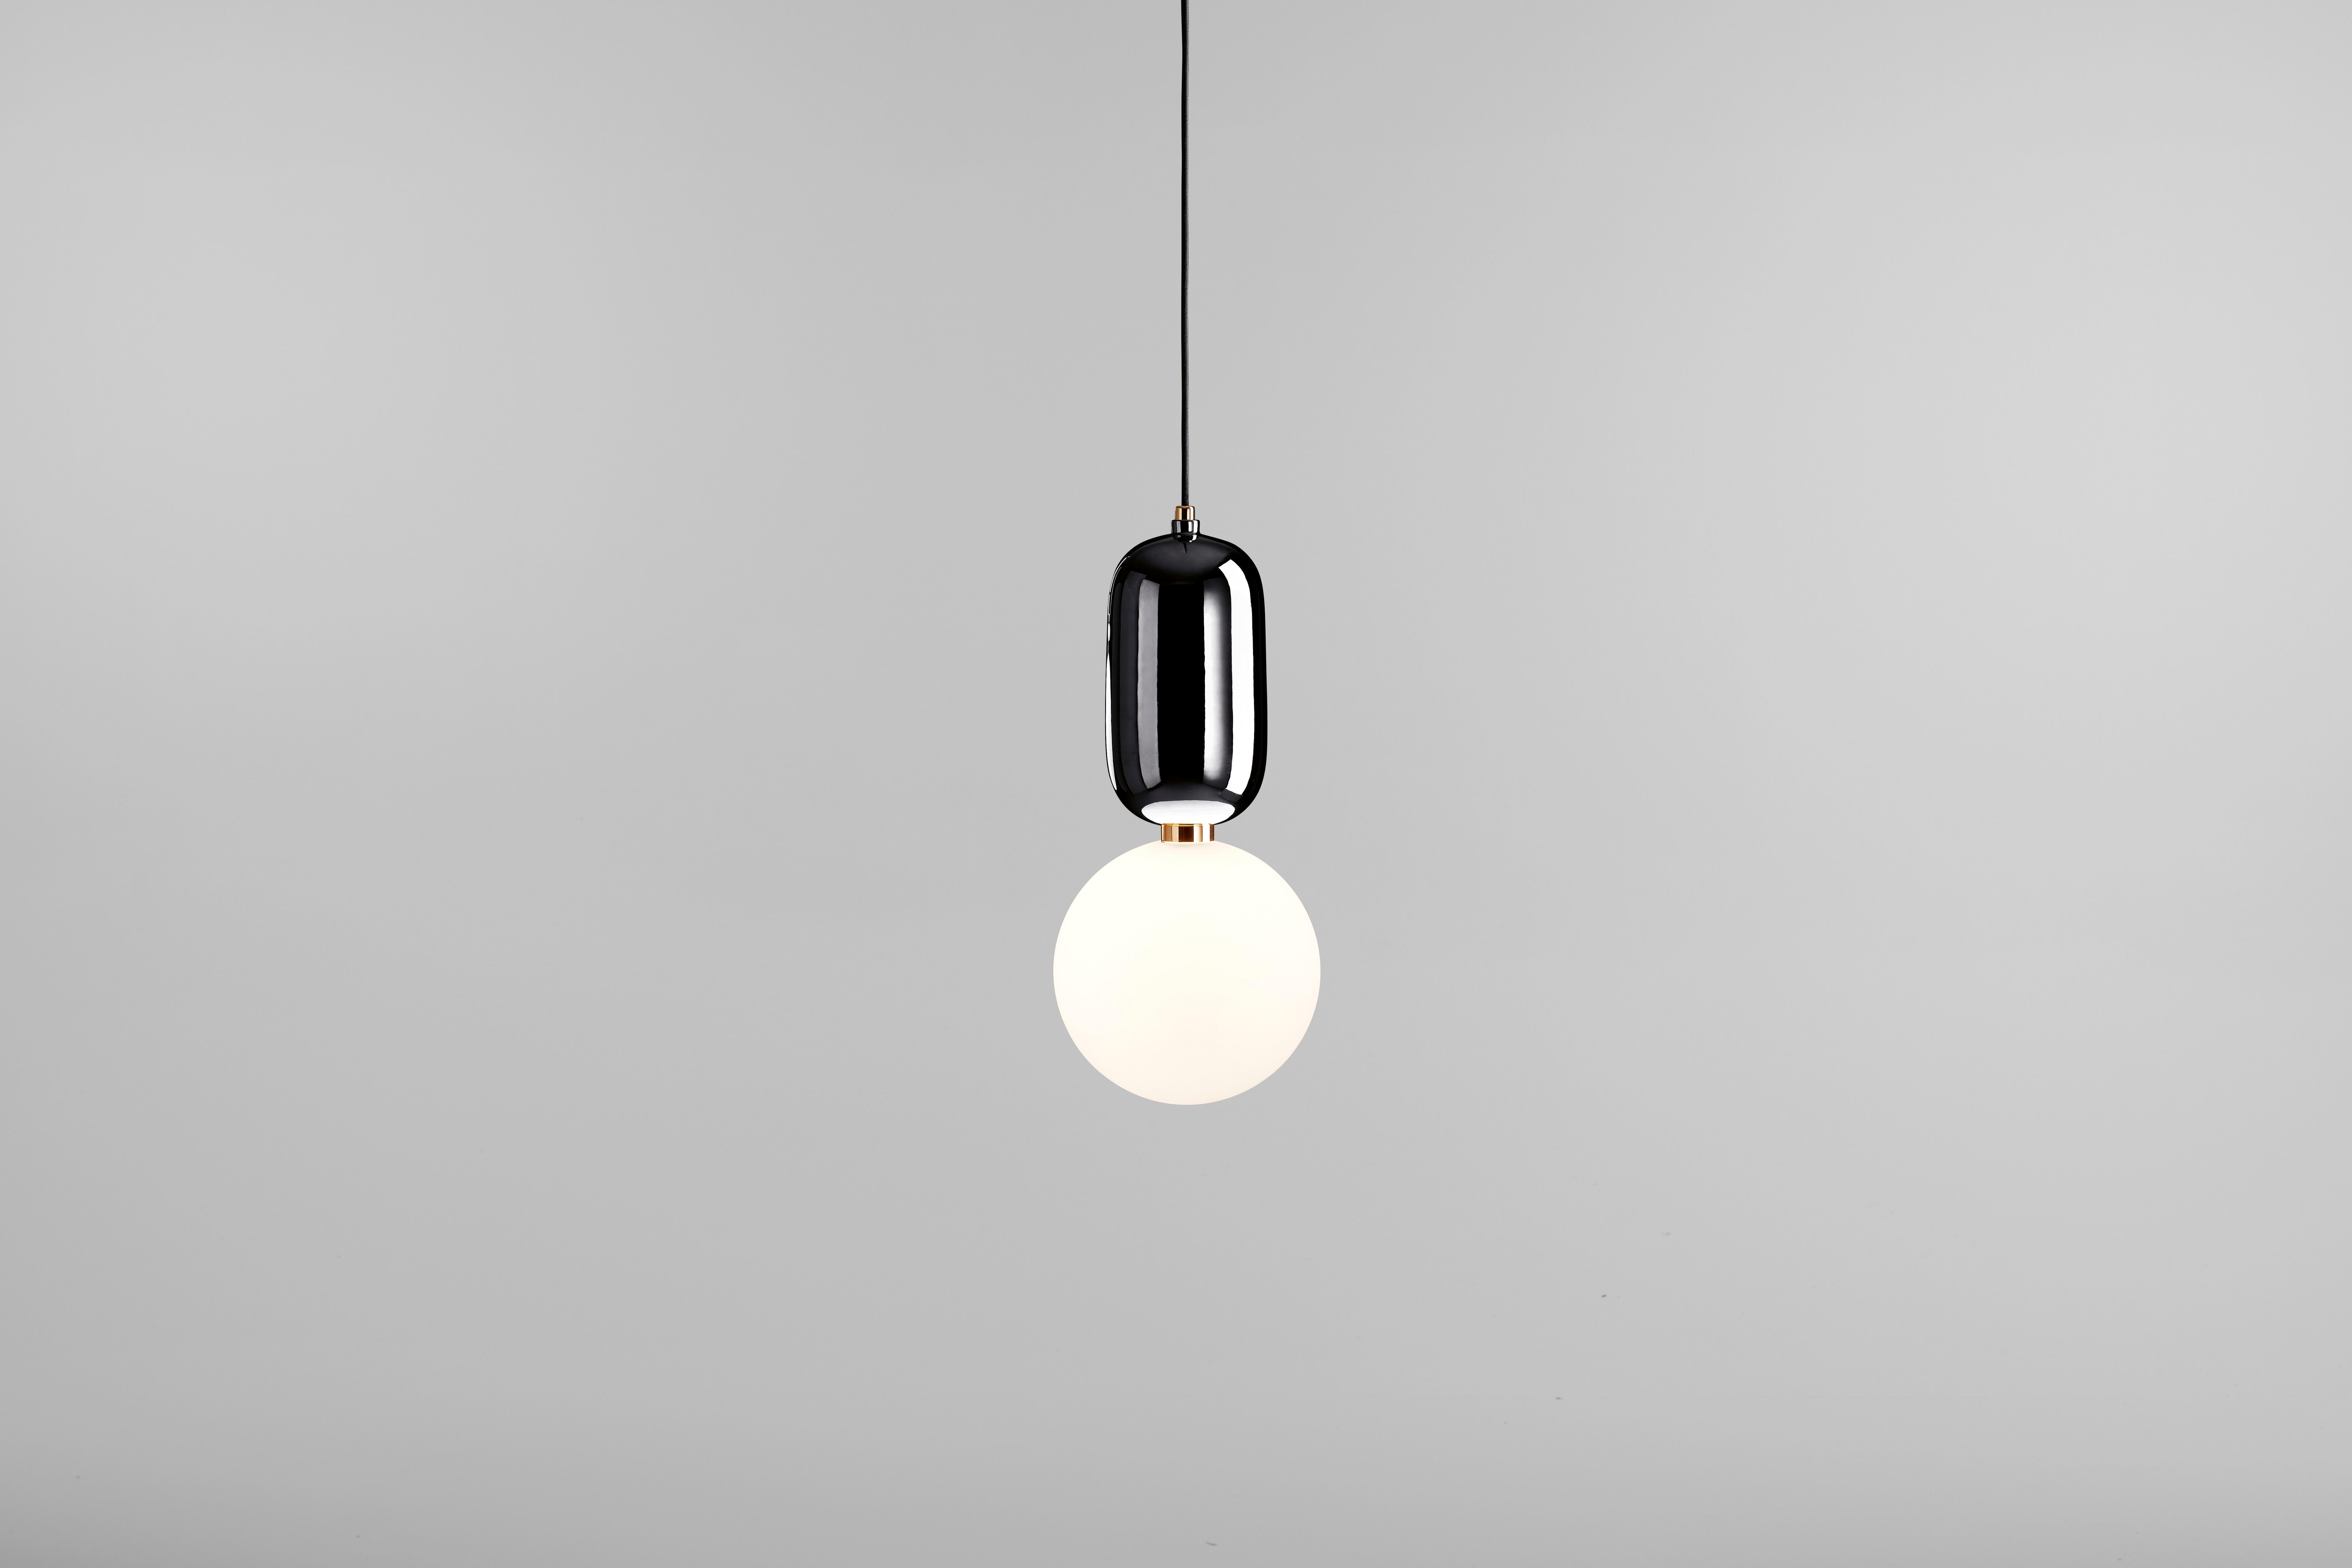 Suspension lamp, model Aballs T ME, designed by Jaime Hayon in 2013.
Manufactured by Parachilna.
Handmade ceramic body and blown opal matt glass diffuser. 
Base is also available in white, black, golden, copper or platinum ceramic. 


Shiny and